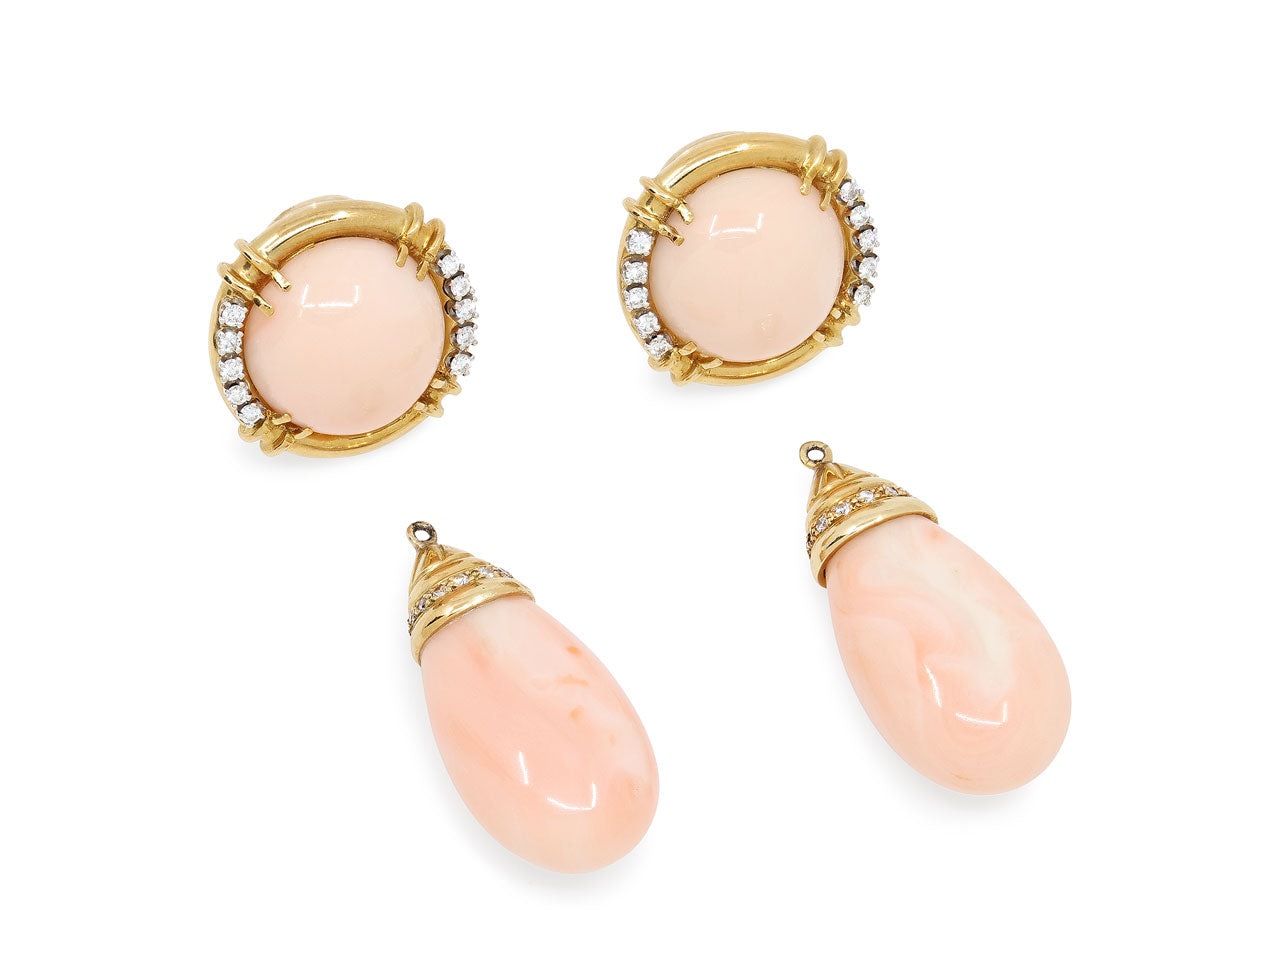 Gump's Diamond and Coral Earrings in 18K Gold